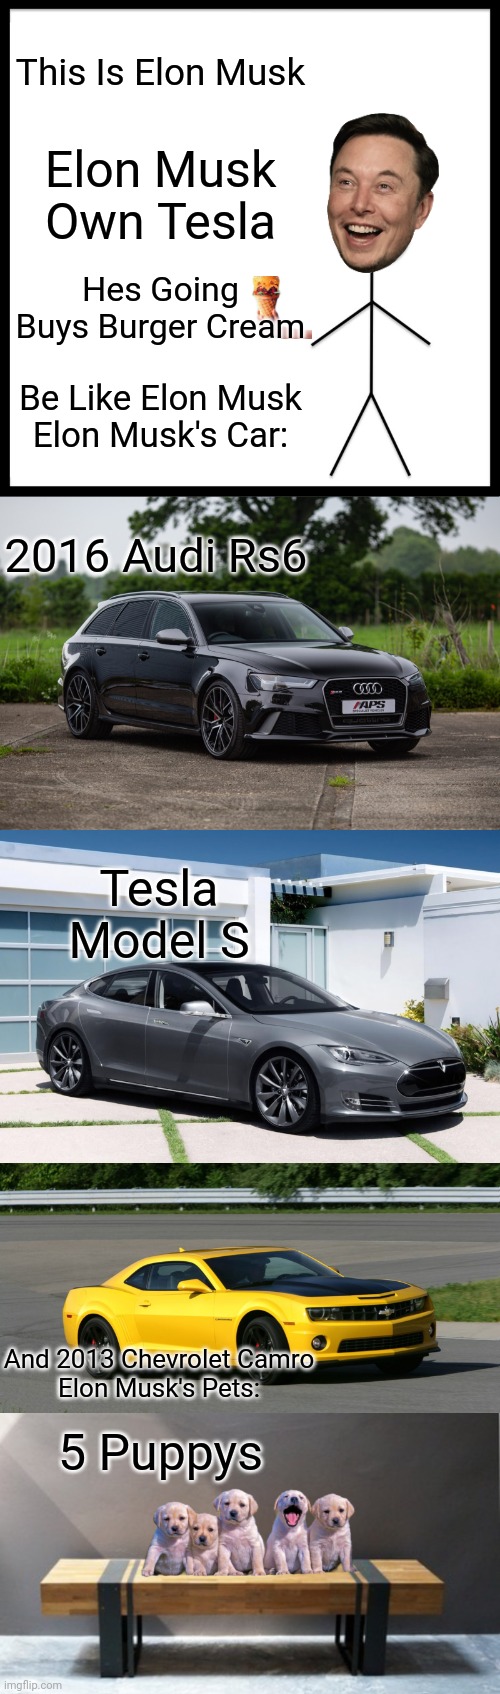 This Is Elon Musk; Elon Musk Own Tesla; Hes Going Buys Burger Cream; Be Like Elon Musk
Elon Musk's Car:; 2016 Audi Rs6; Tesla Model S; And 2013 Chevrolet Camro
Elon Musk's Pets:; 5 Puppys | image tagged in be like bill,elon musk,audi,tesla,chevrolet,puppy | made w/ Imgflip meme maker